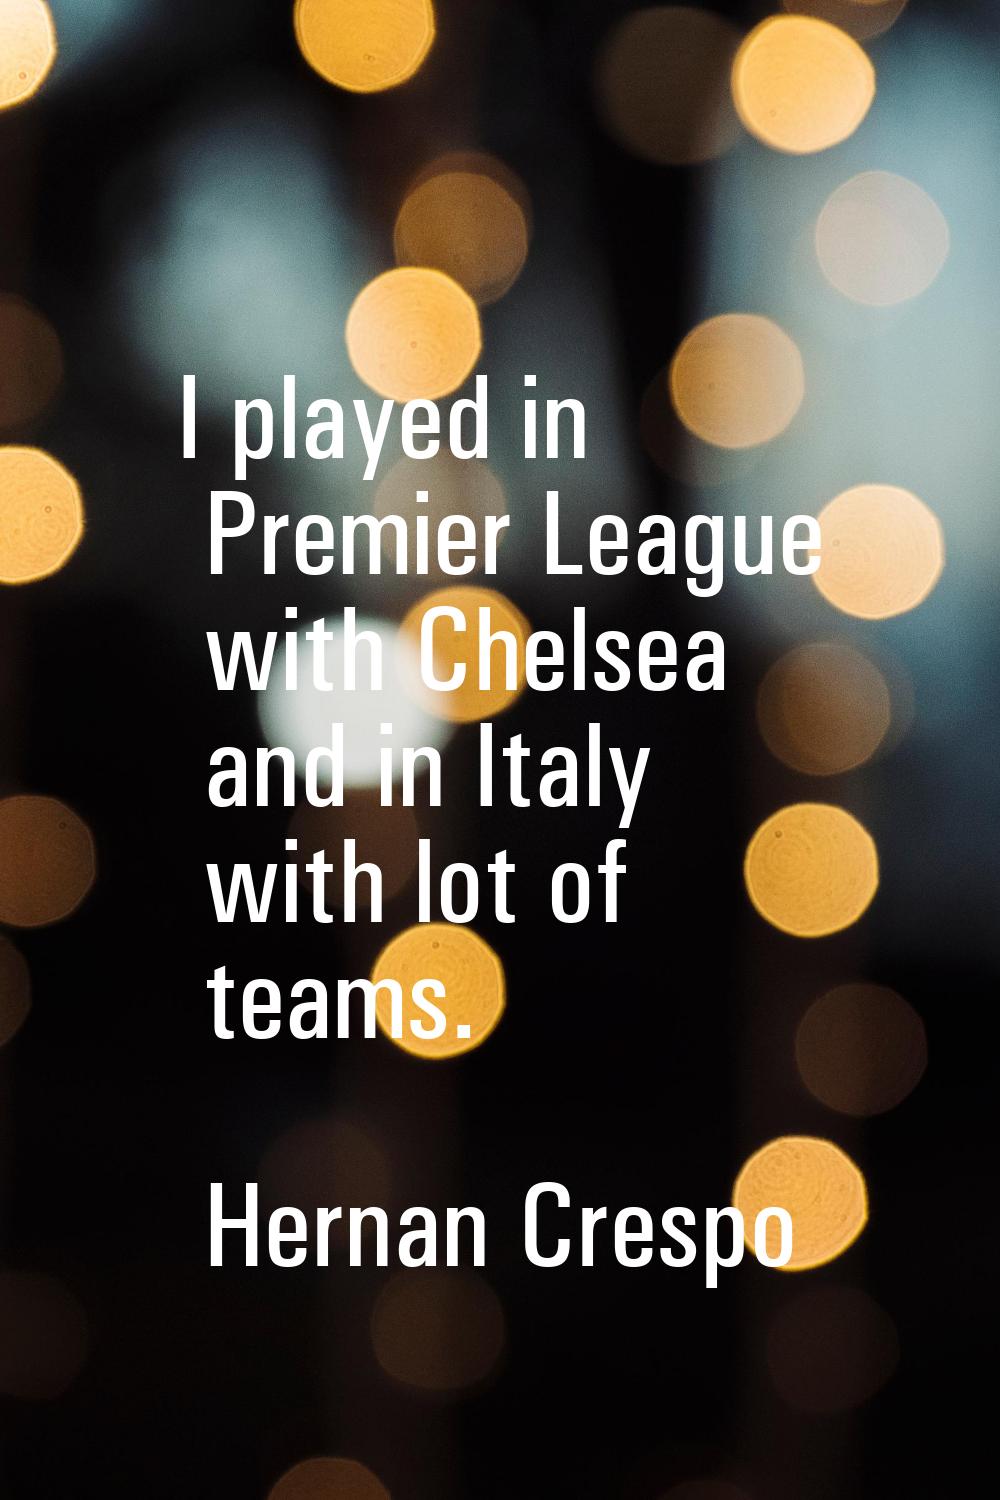 I played in Premier League with Chelsea and in Italy with lot of teams.